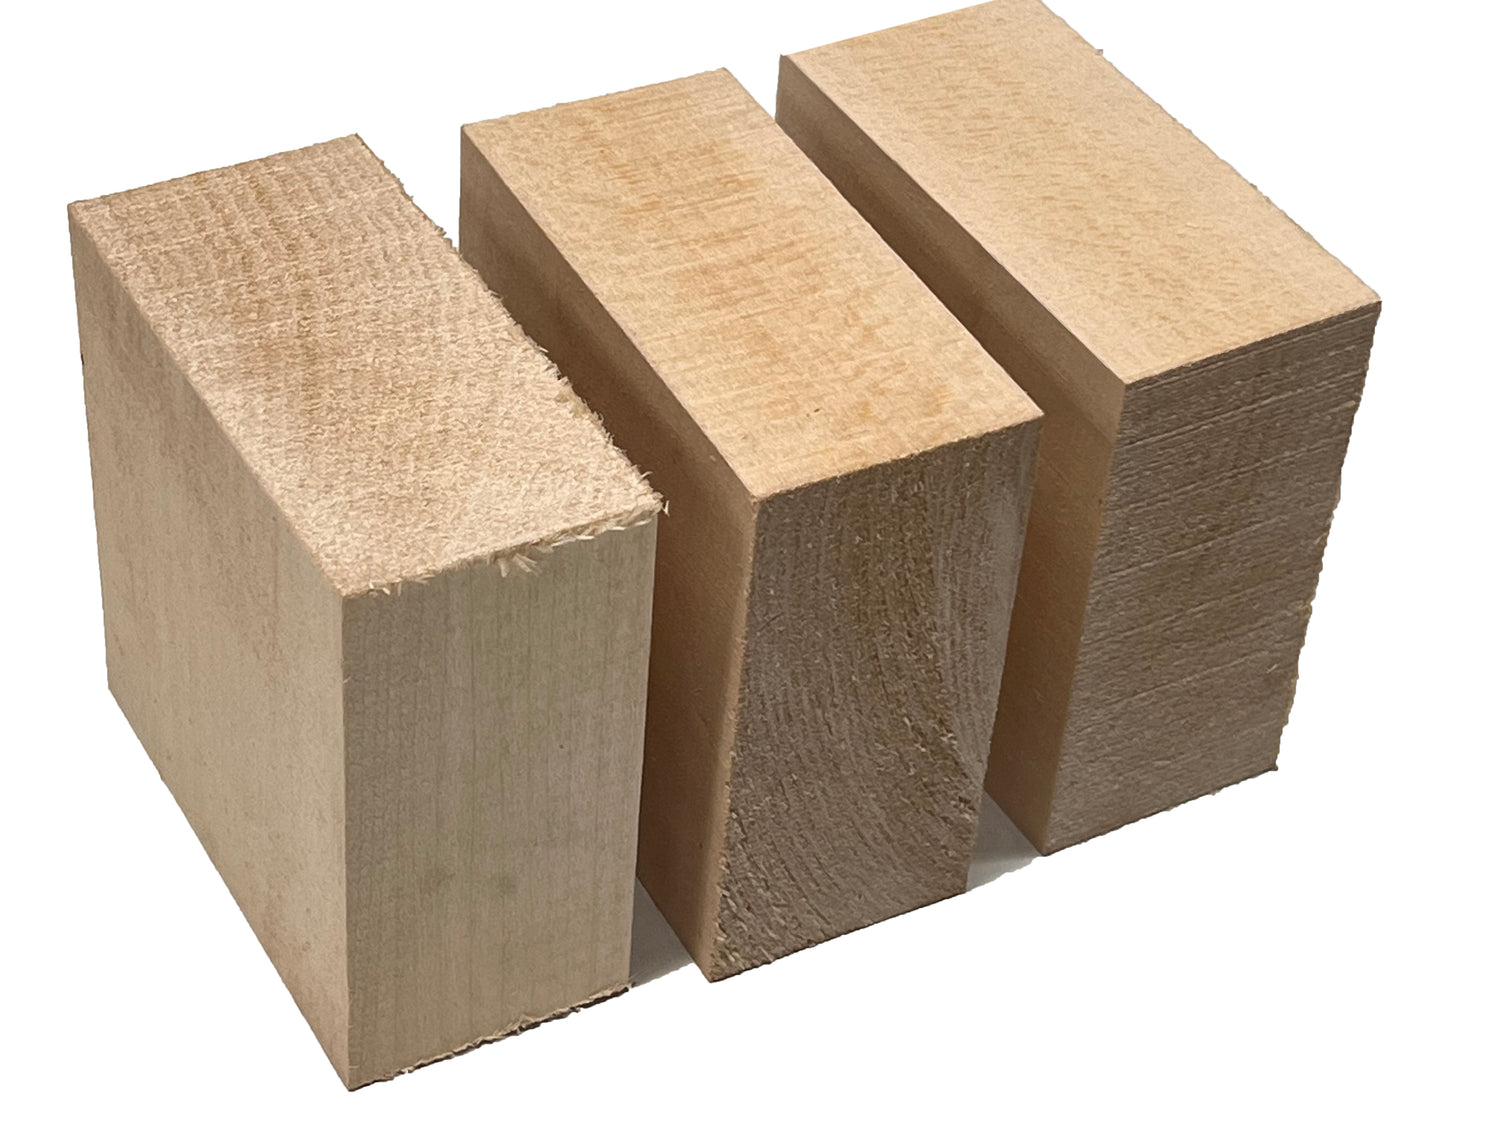 Wood blocks for Woodcarving, Basswood Carving Blocks Kit for